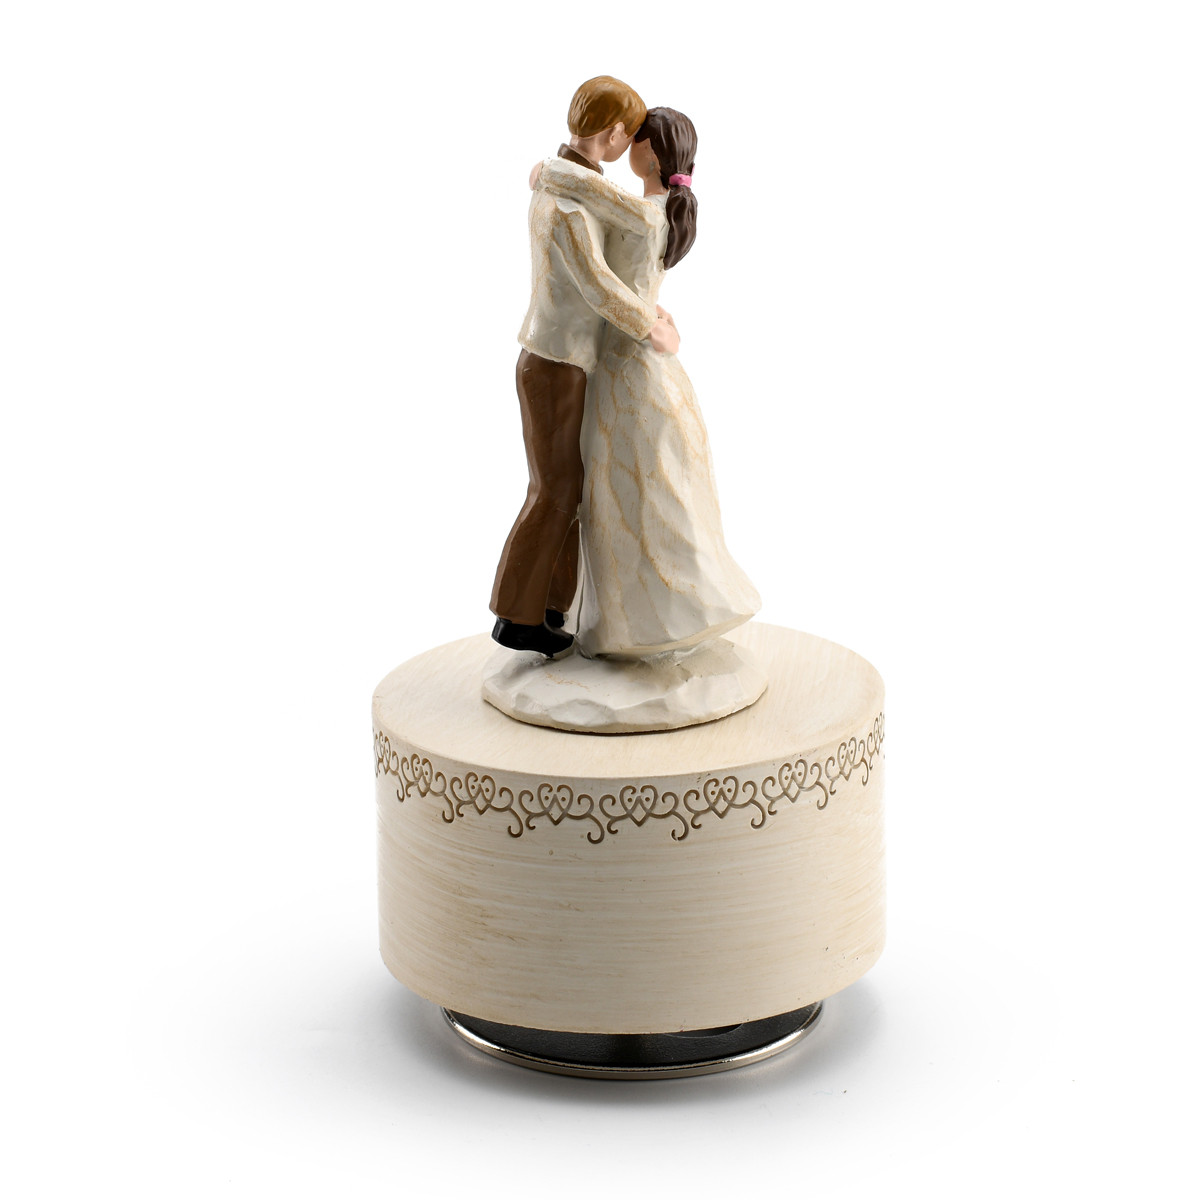 Image of Sculpted Wooden Style Musical Figurine of Devoted Couple in Dance